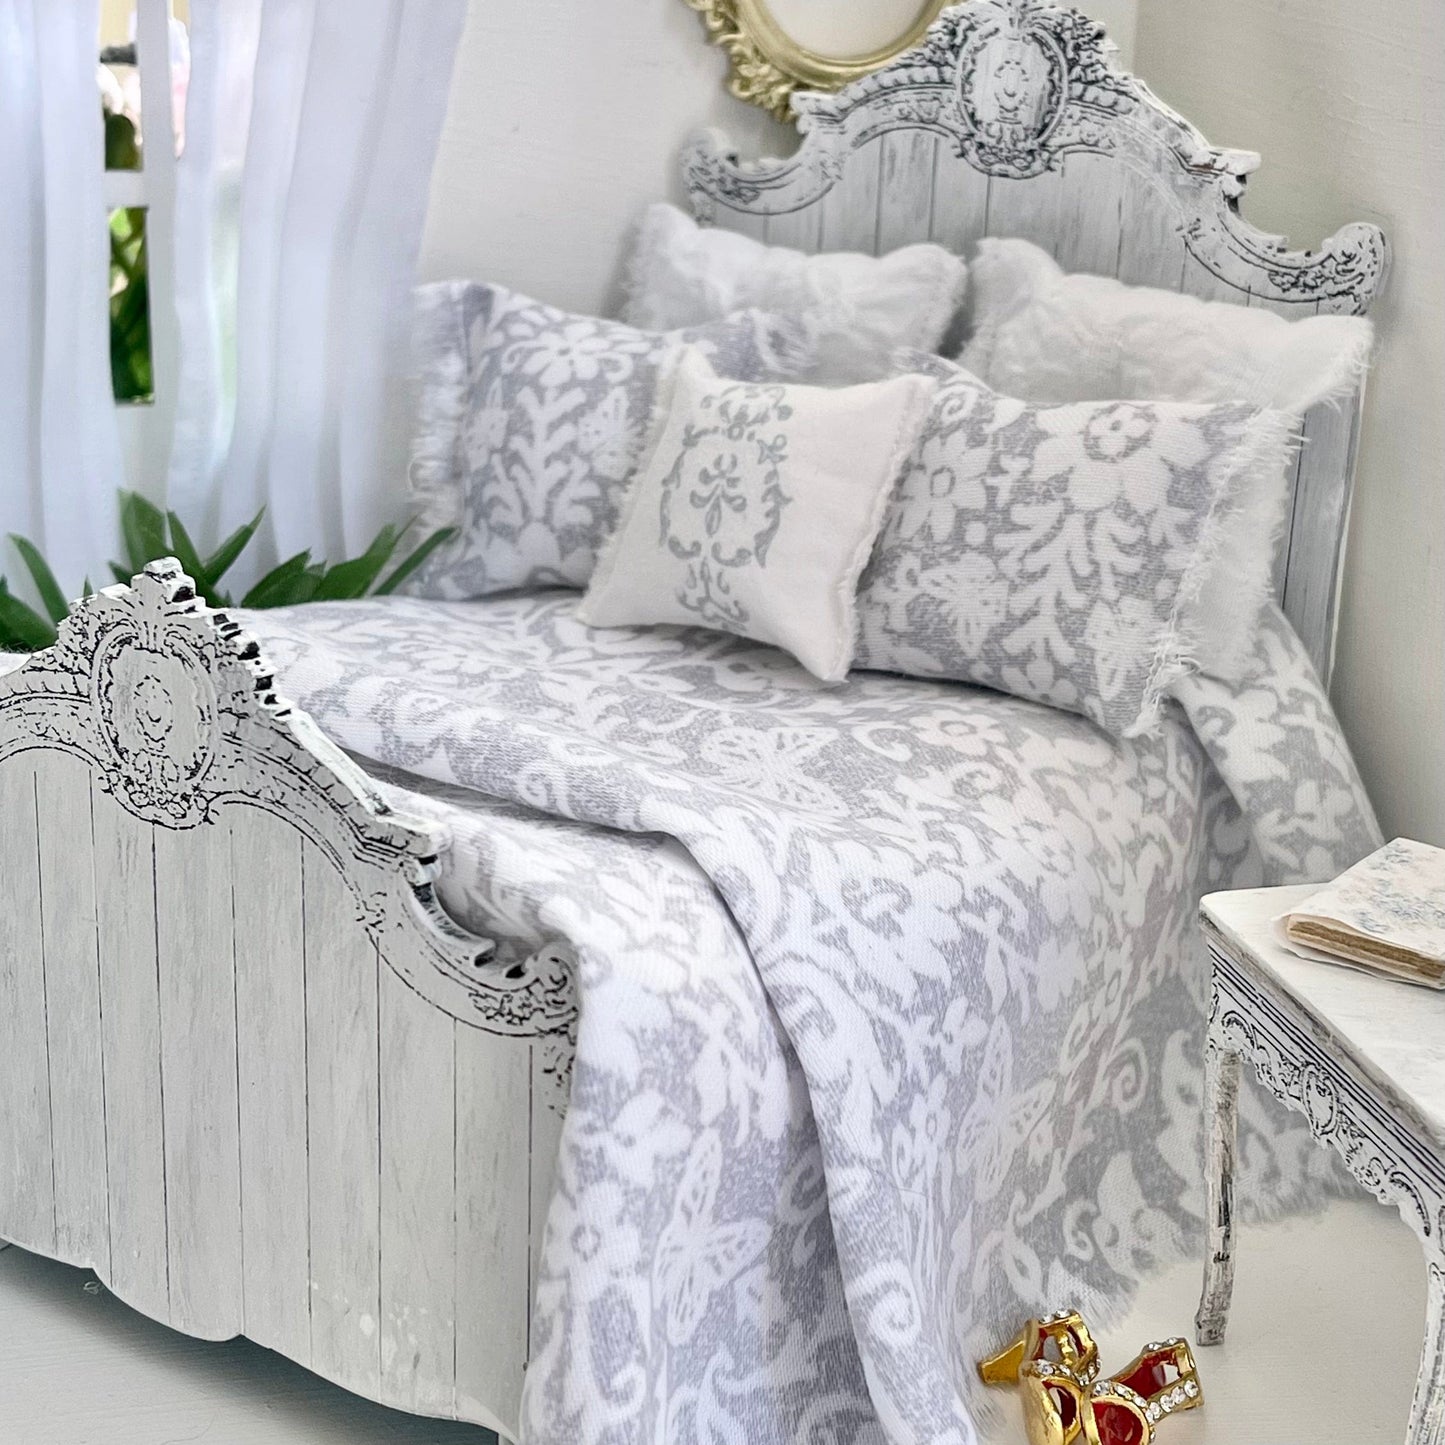 Chantallena Doll House Single Bedding Set Country Weekend | Grey Cotton Bedding Set with White Lace Trim| Blue Country Meadow